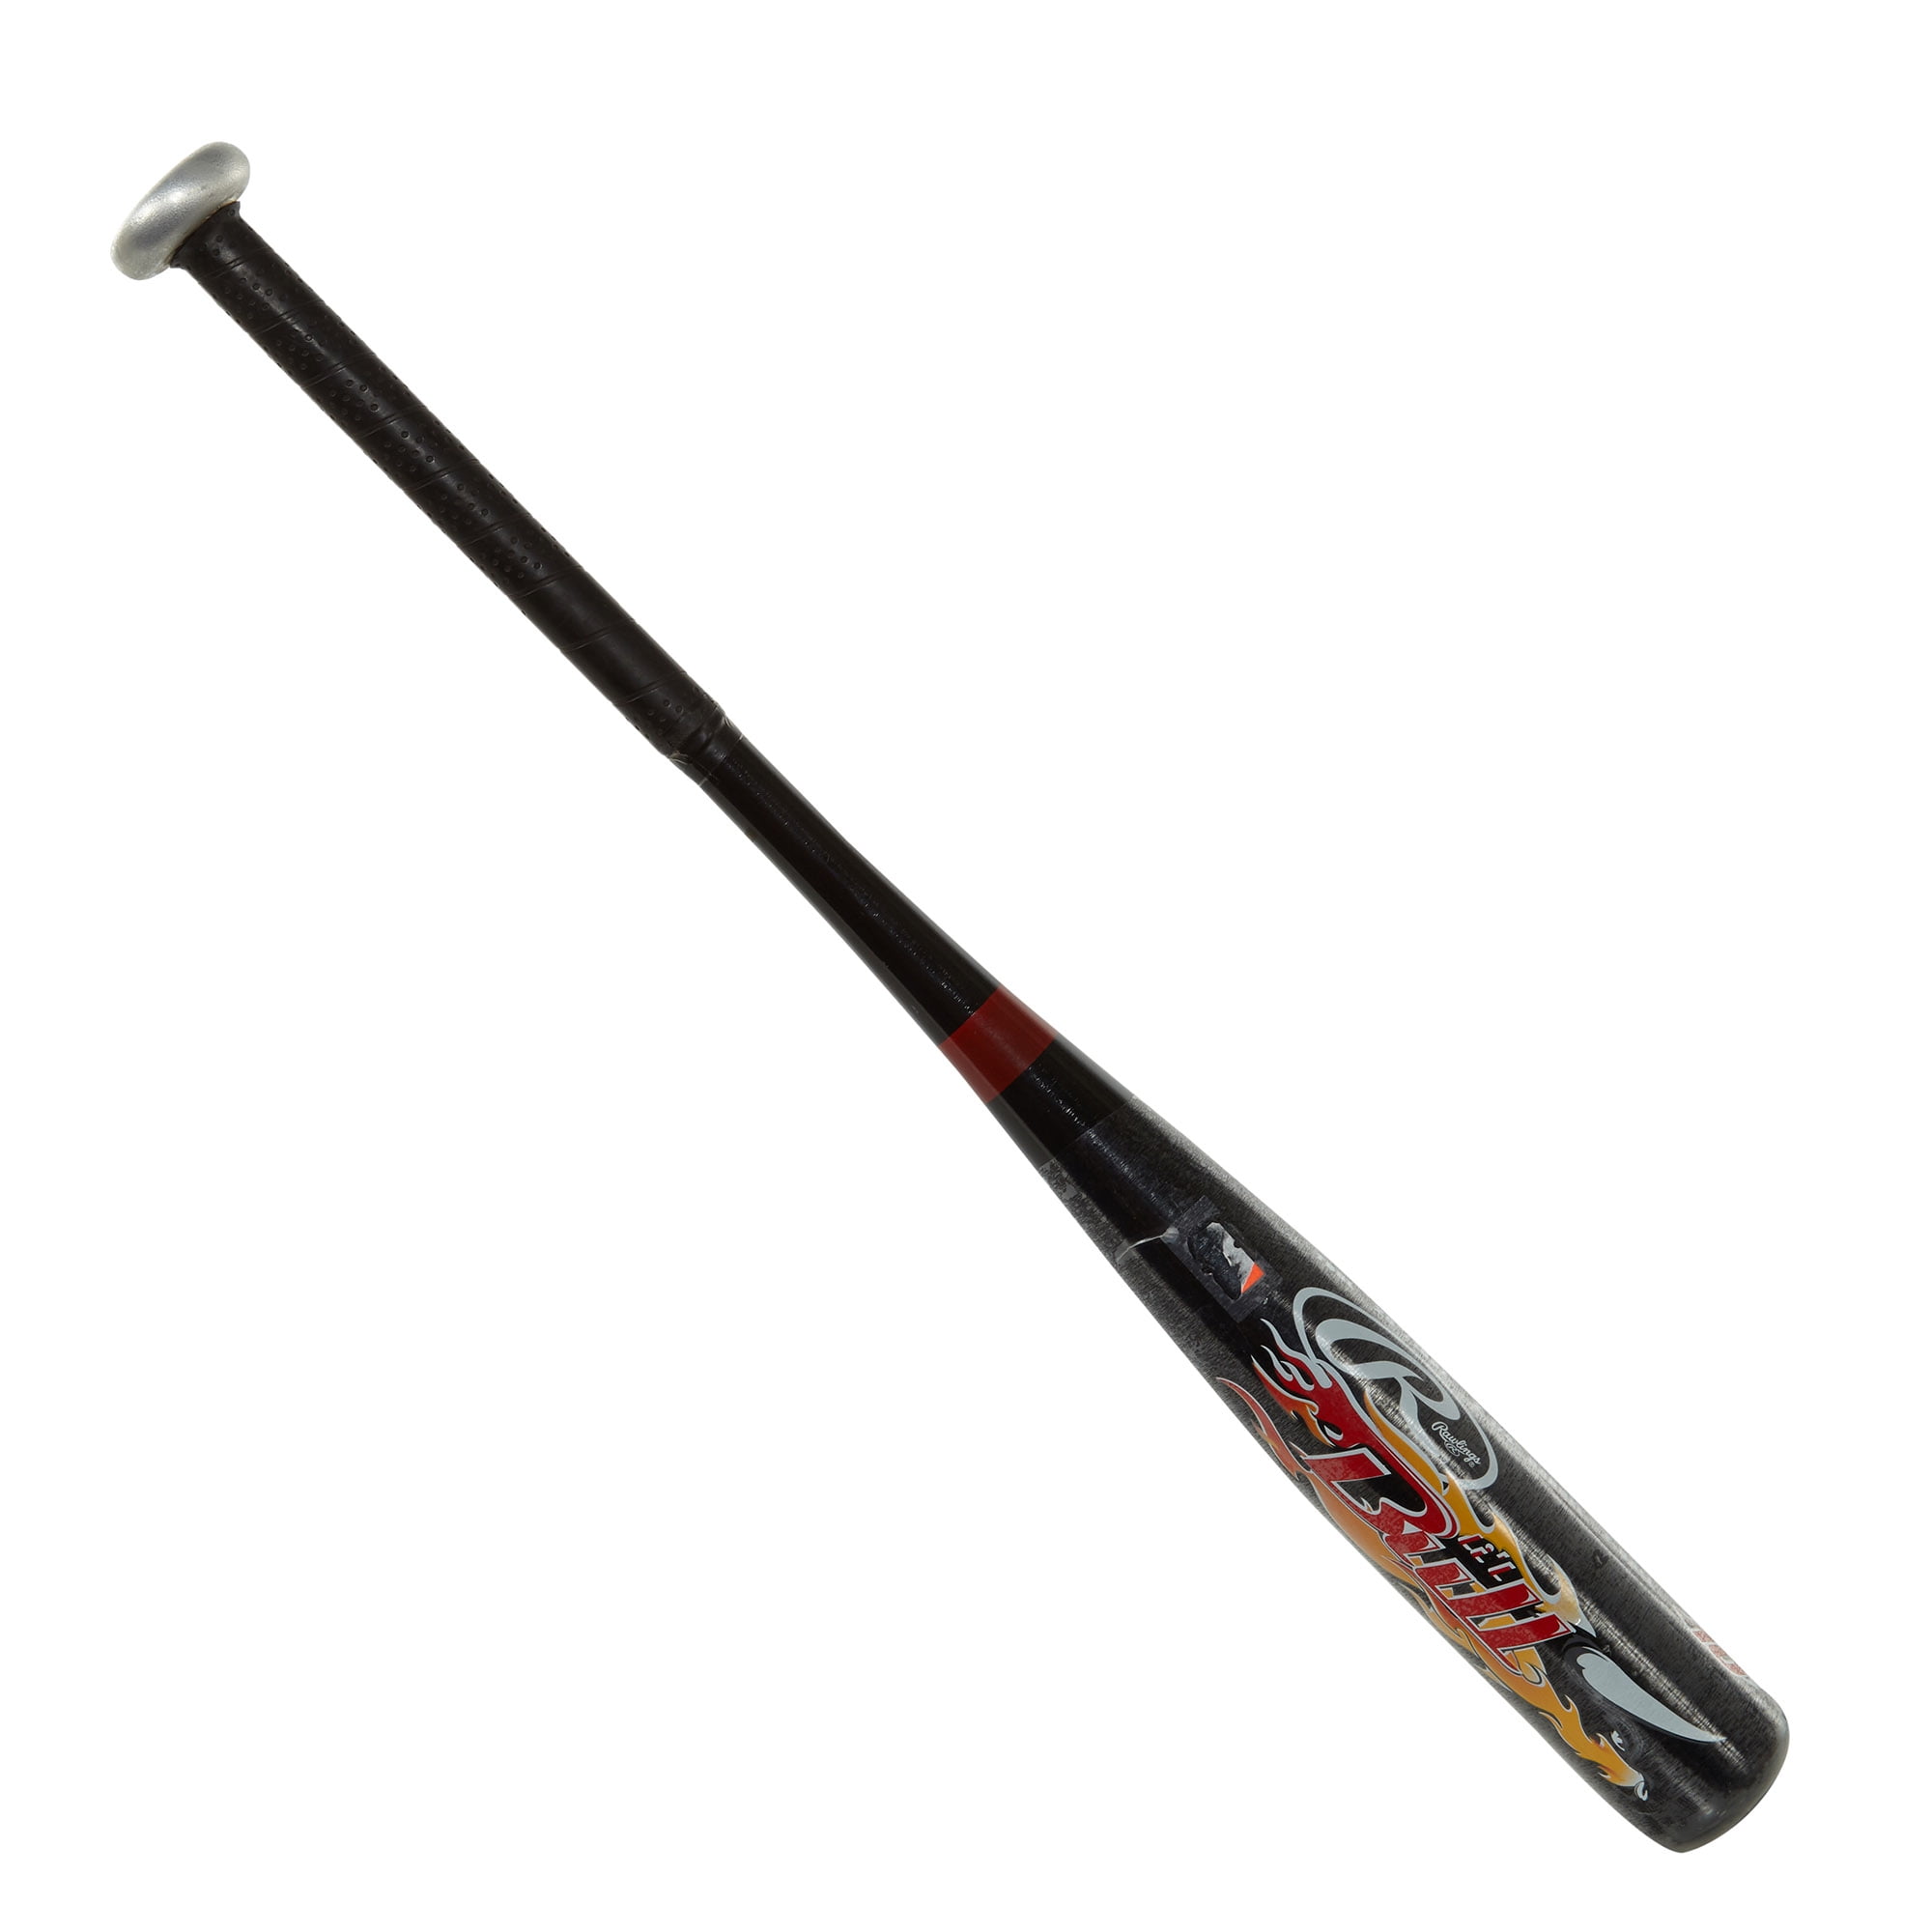 - NEW!!! Details about    EASTON RIVAL YOUTH BASEBALL BAT -10 2 1/4" DIA 29"/ 19 oz 